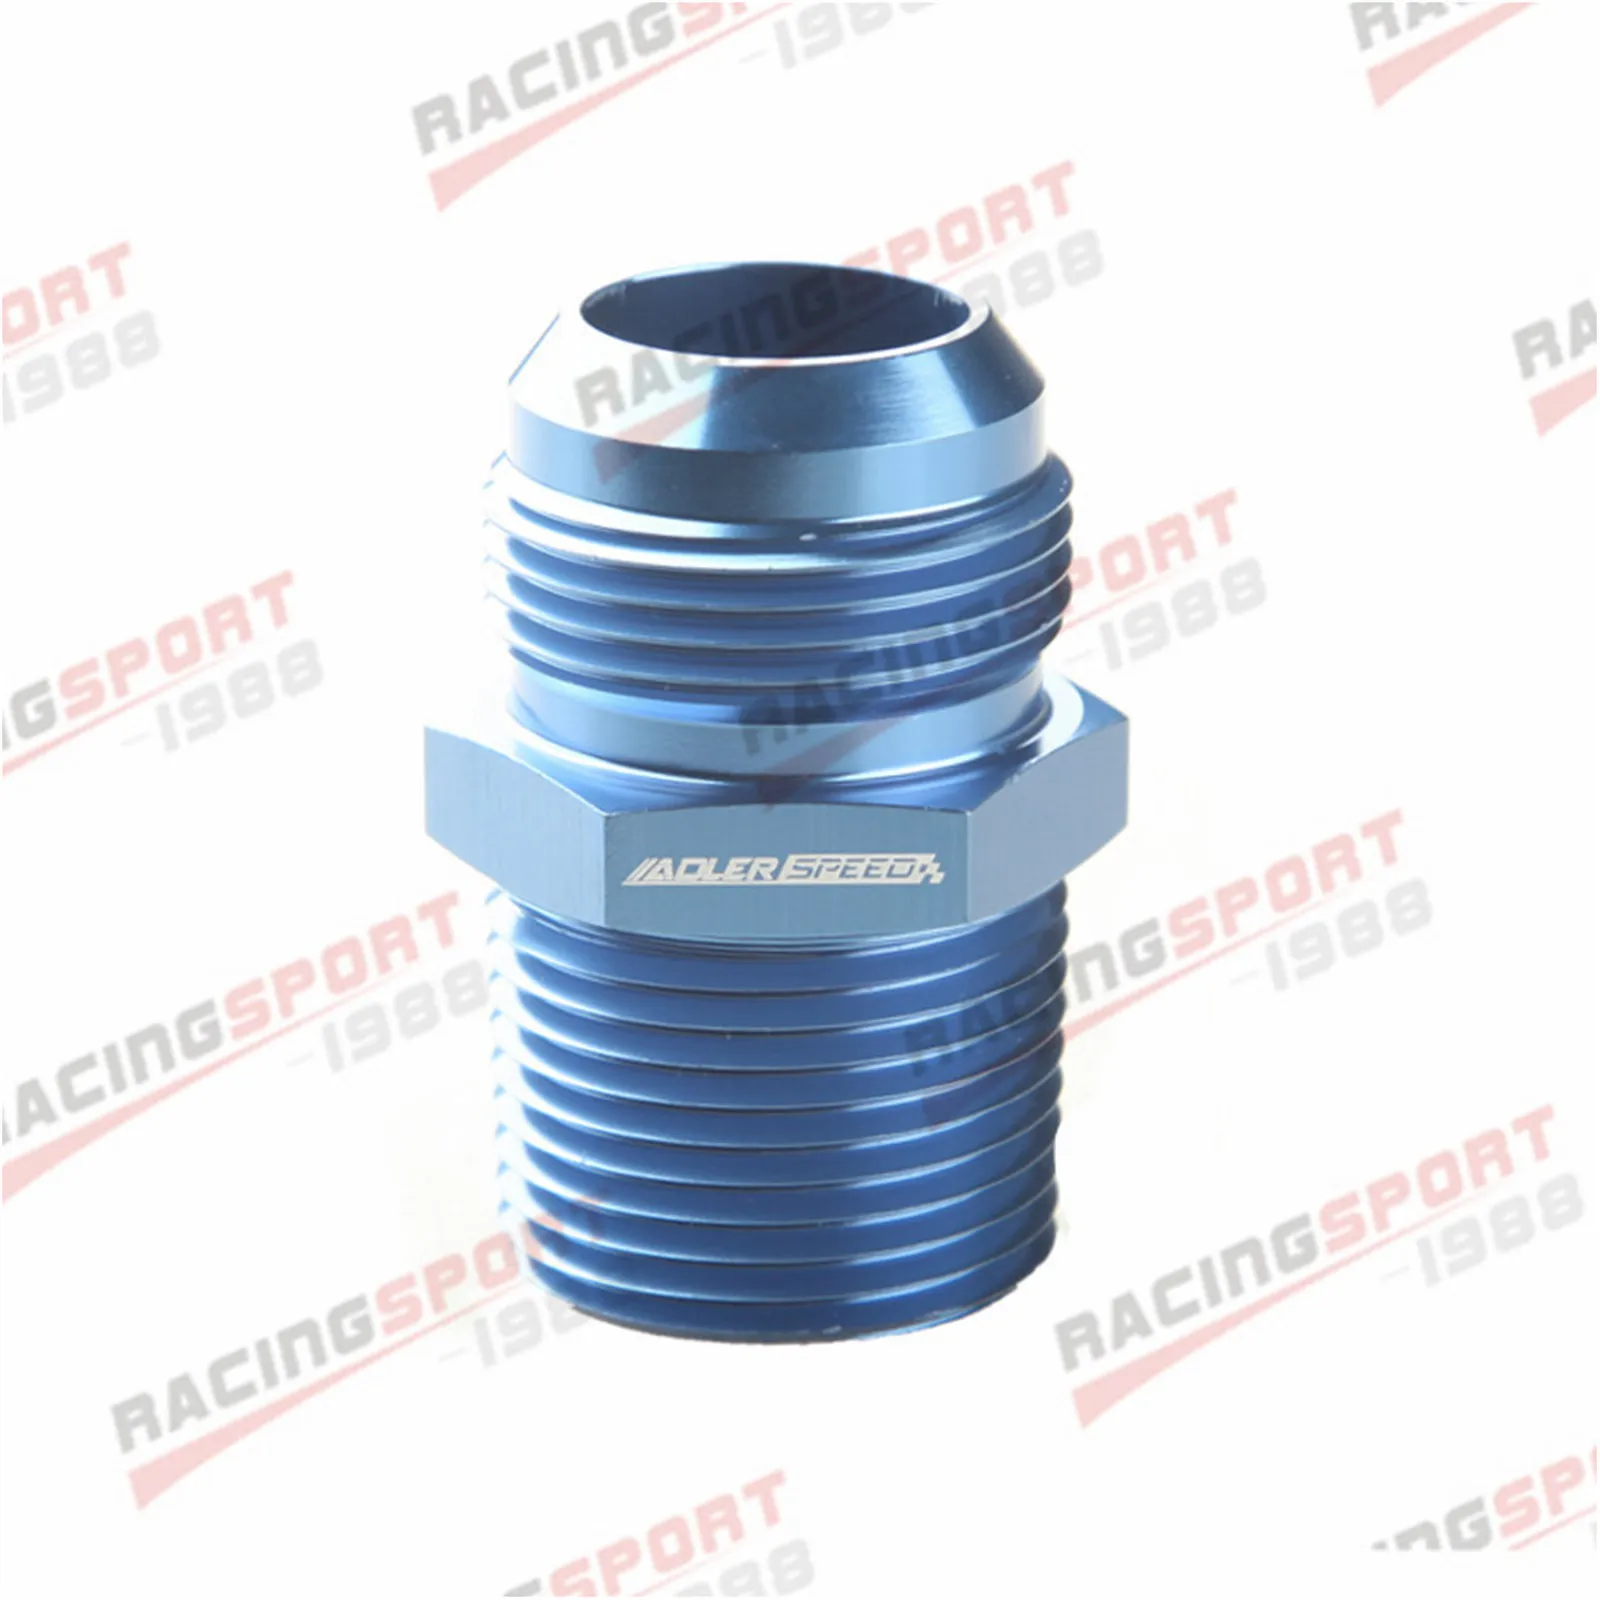 Aluminium Alloy 6mm Pipe Fitting Dia Connector Set for 280/380 Pressure Washer 